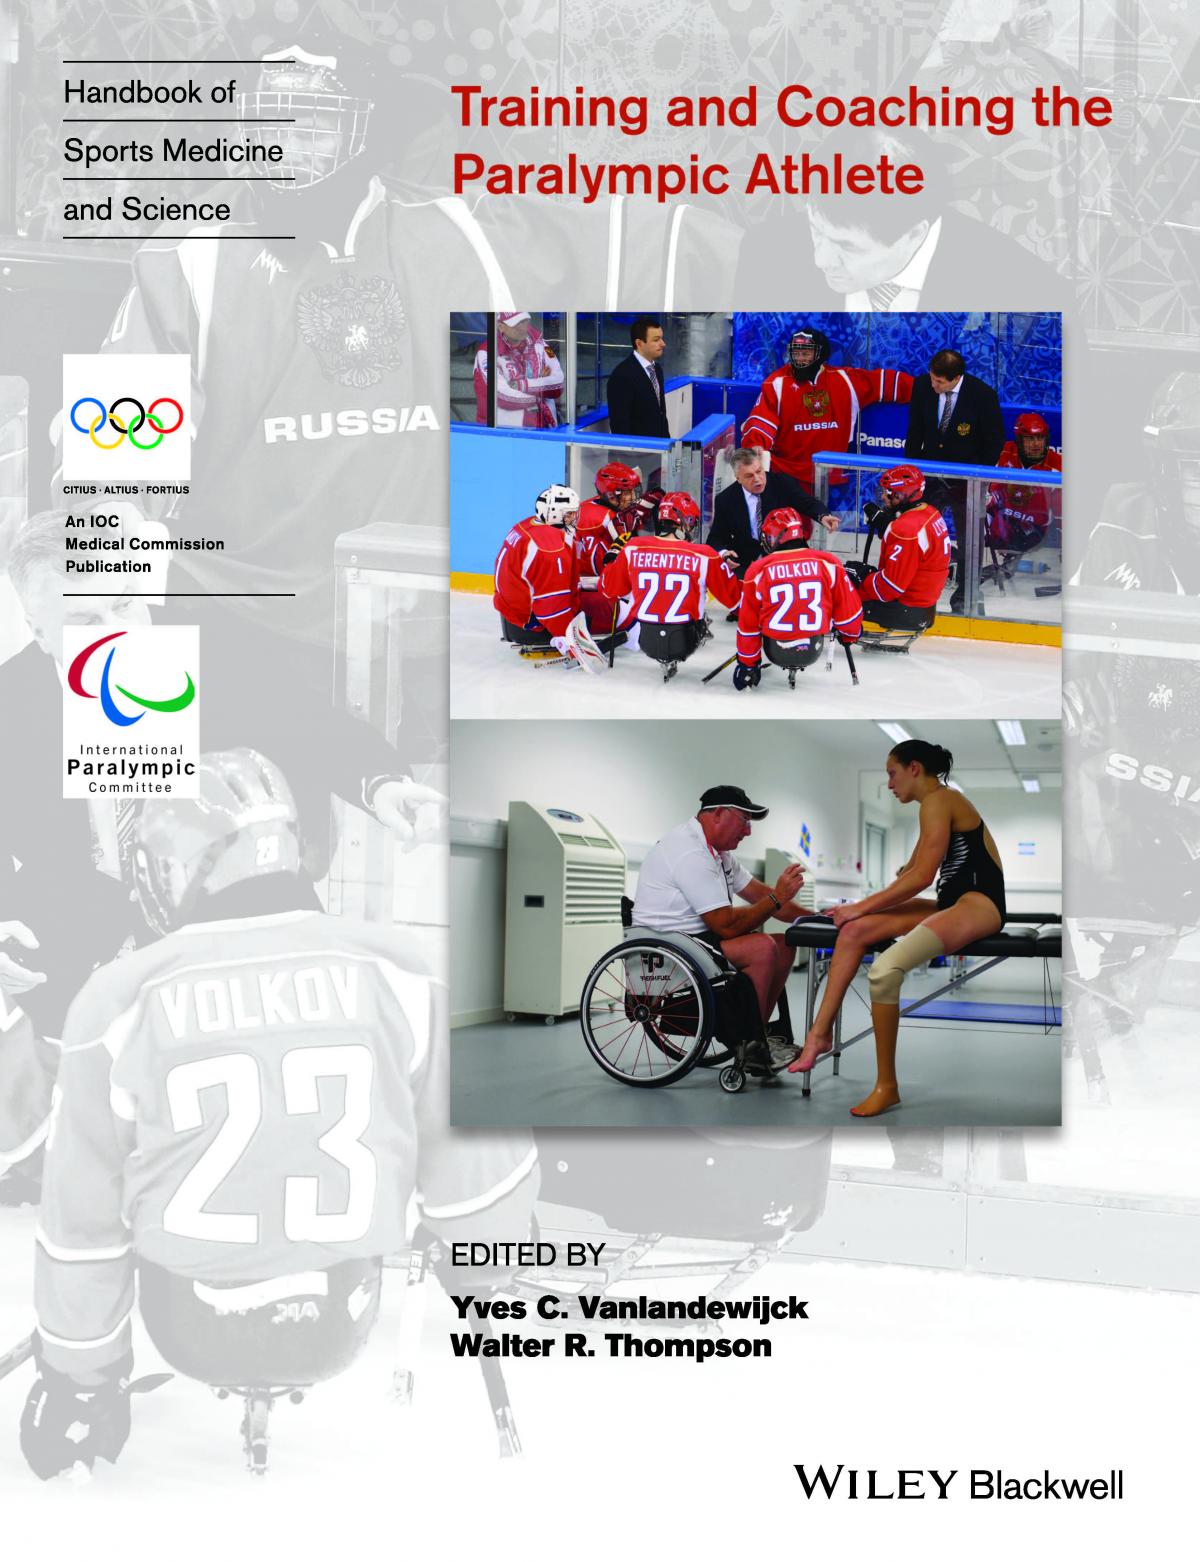 Book cover with images of Paralympic athletes and their coaches